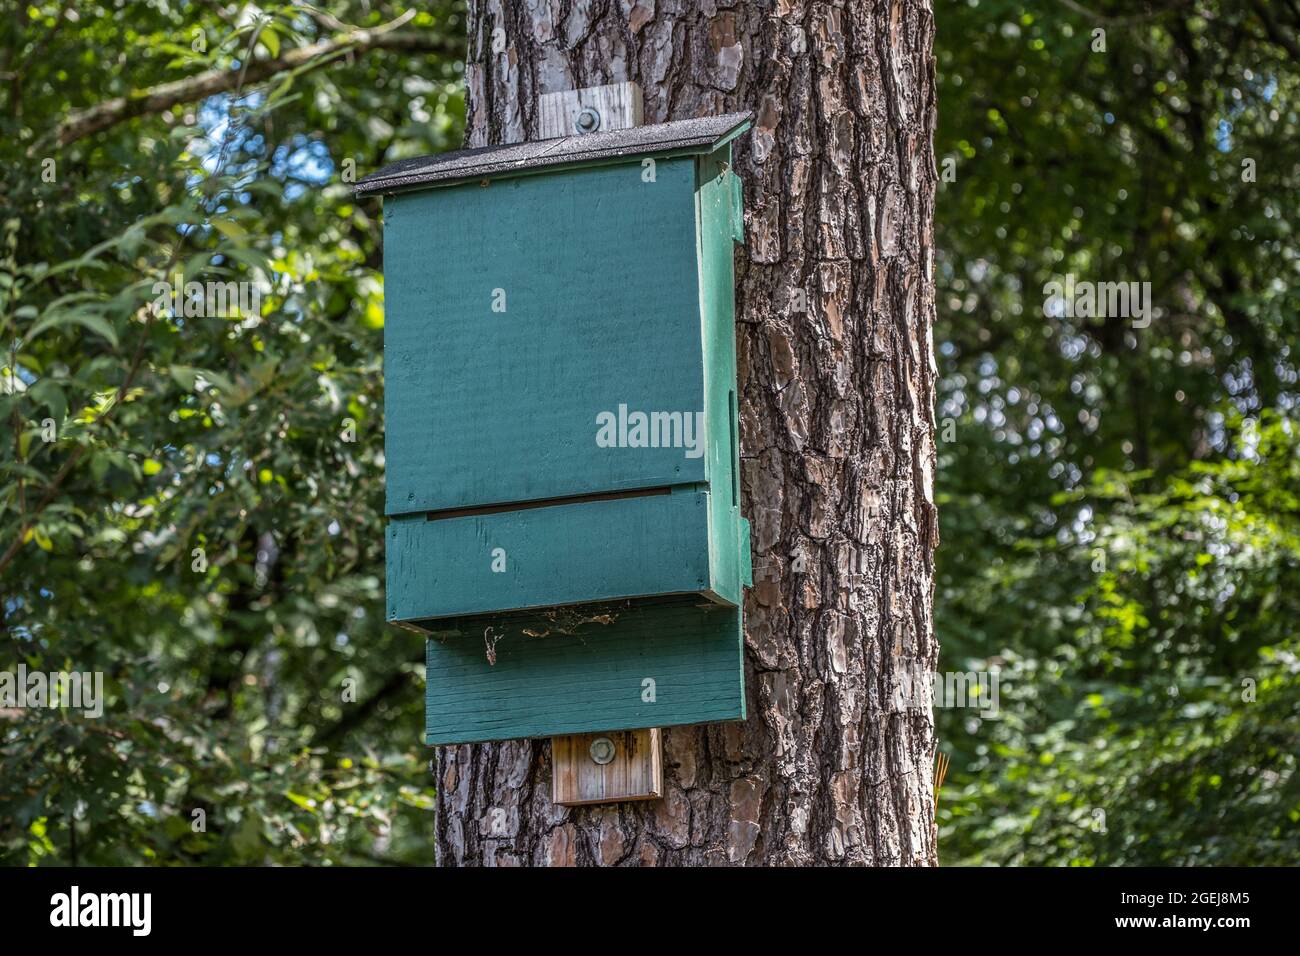 A painted wooden bat housing box high up mounted on a tree vertically where the bats fly into the bottom and hang upside down on the inside for protec Stock Photo